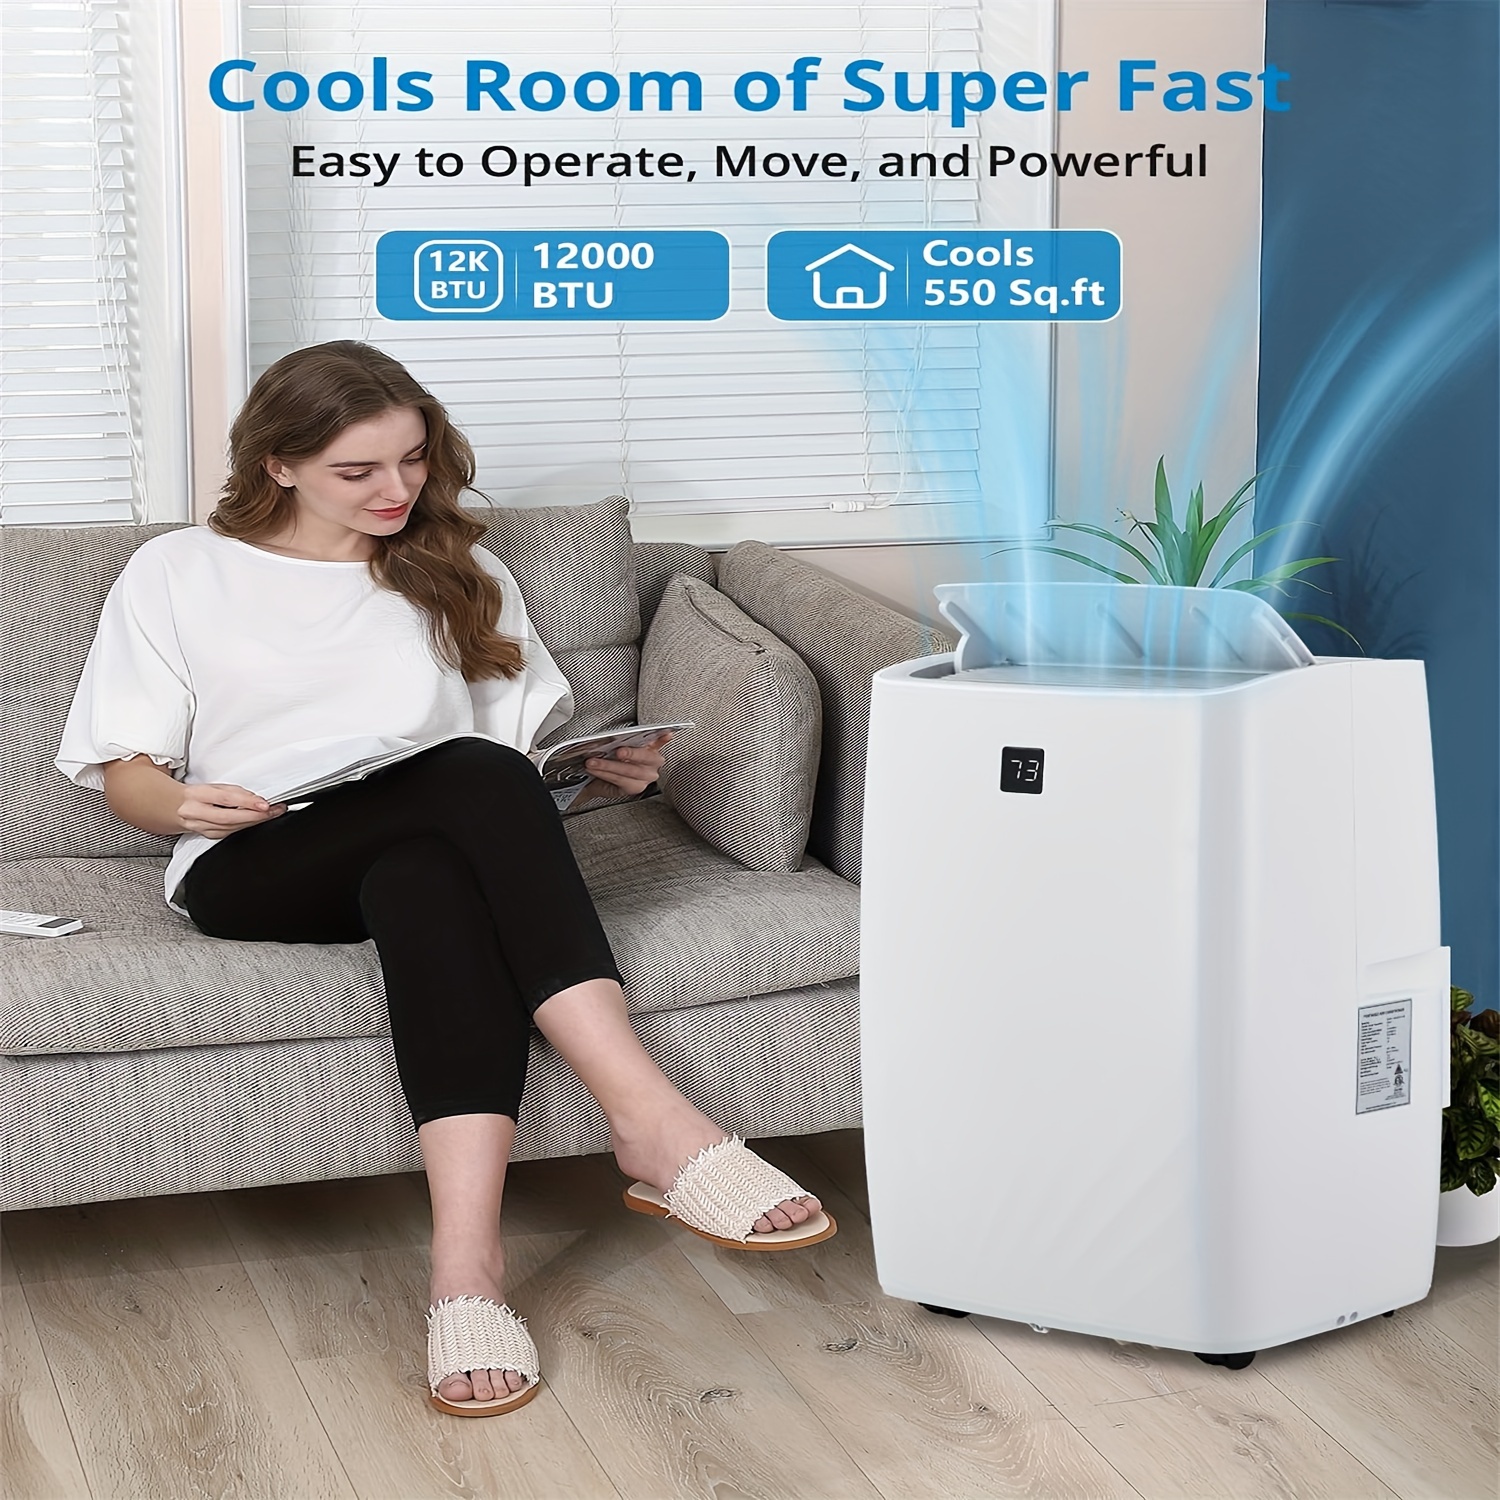 

12000 Btu Unit, Air Conditioner With Remote Control, Cool, Fan And Dry Function, Sleep Mode/ Timer, Quiet Operation, 110-115v, Cools 550 Sq.ft